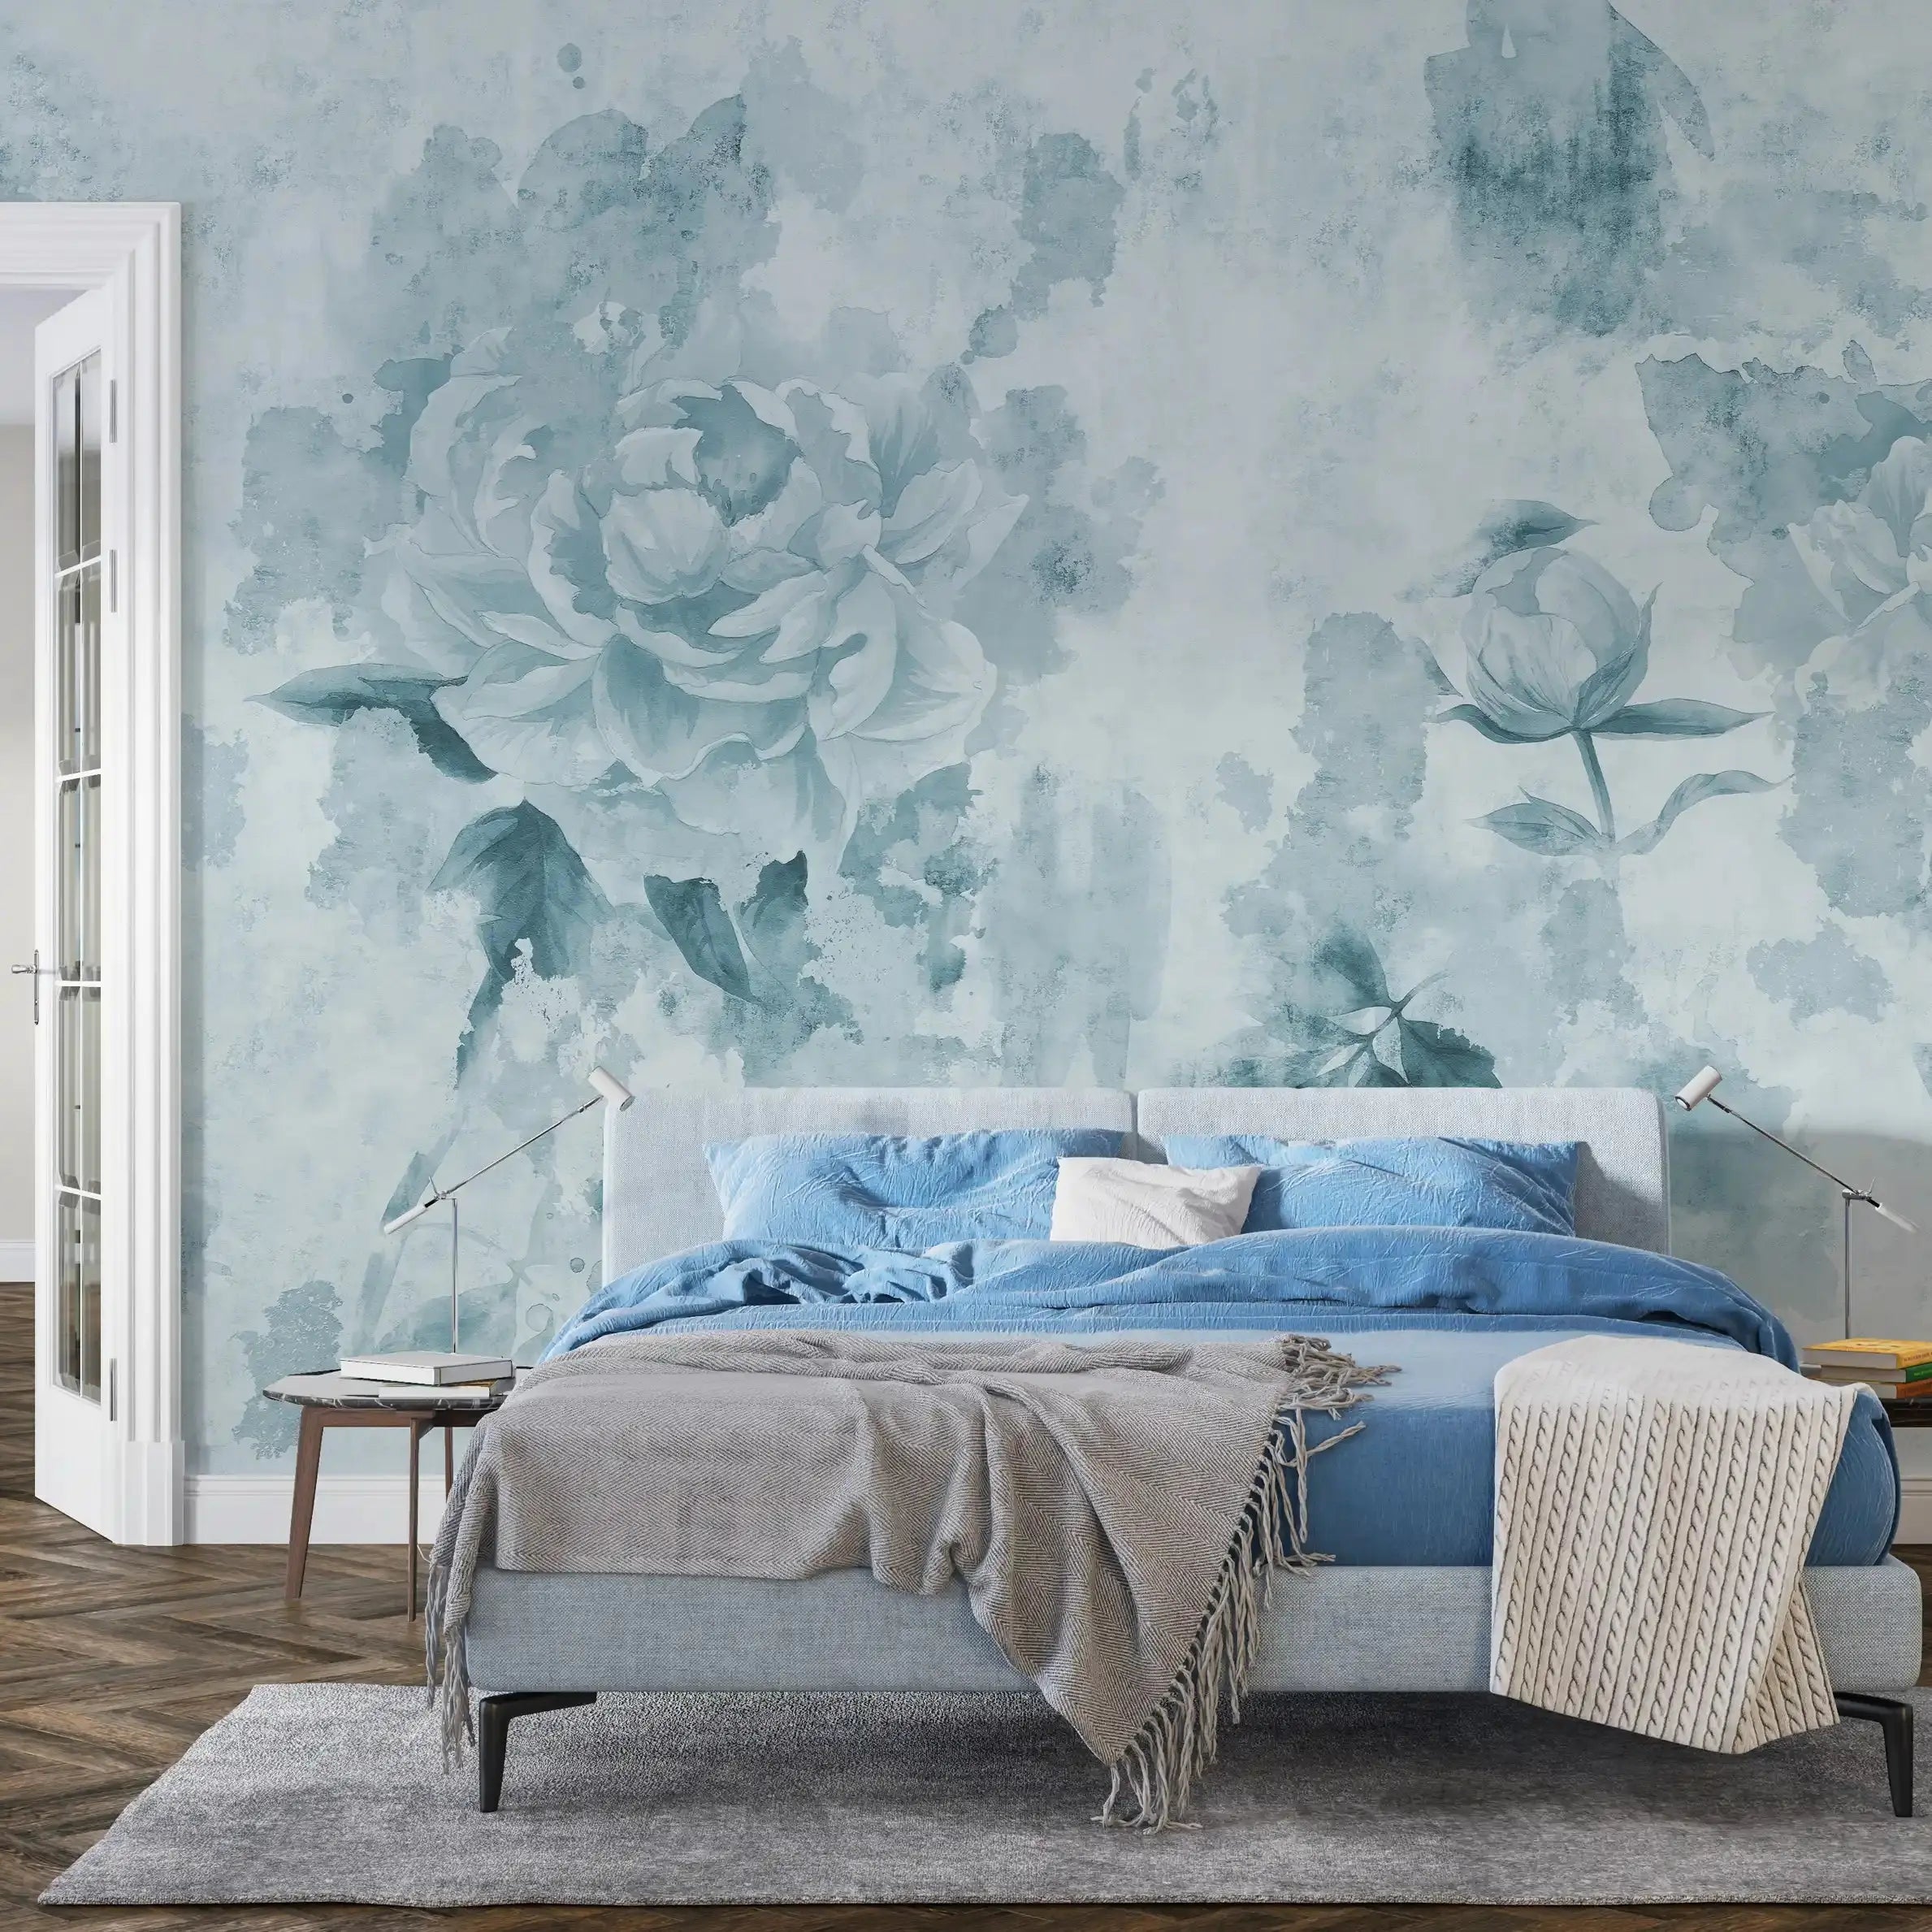 3004-C / Watercolor Floral Peel and Stick Wallpaper - Peony Design for Modern Room Decor, Perfect for Bedroom and Bathroom - Artevella